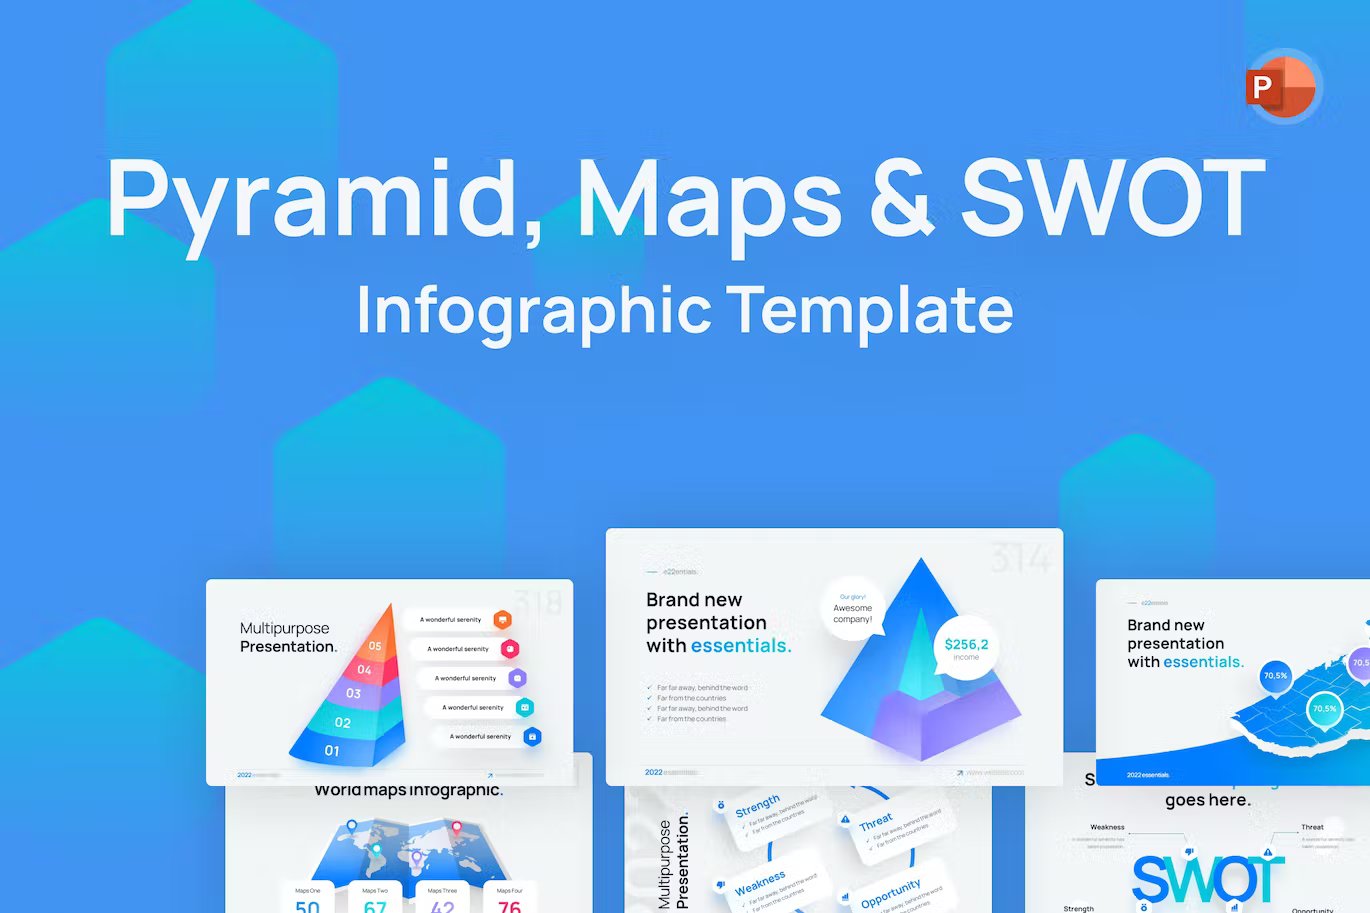 White lettering "Pyramid, Maps & Swot Infographic Template" and different presentation templates on a blue background.